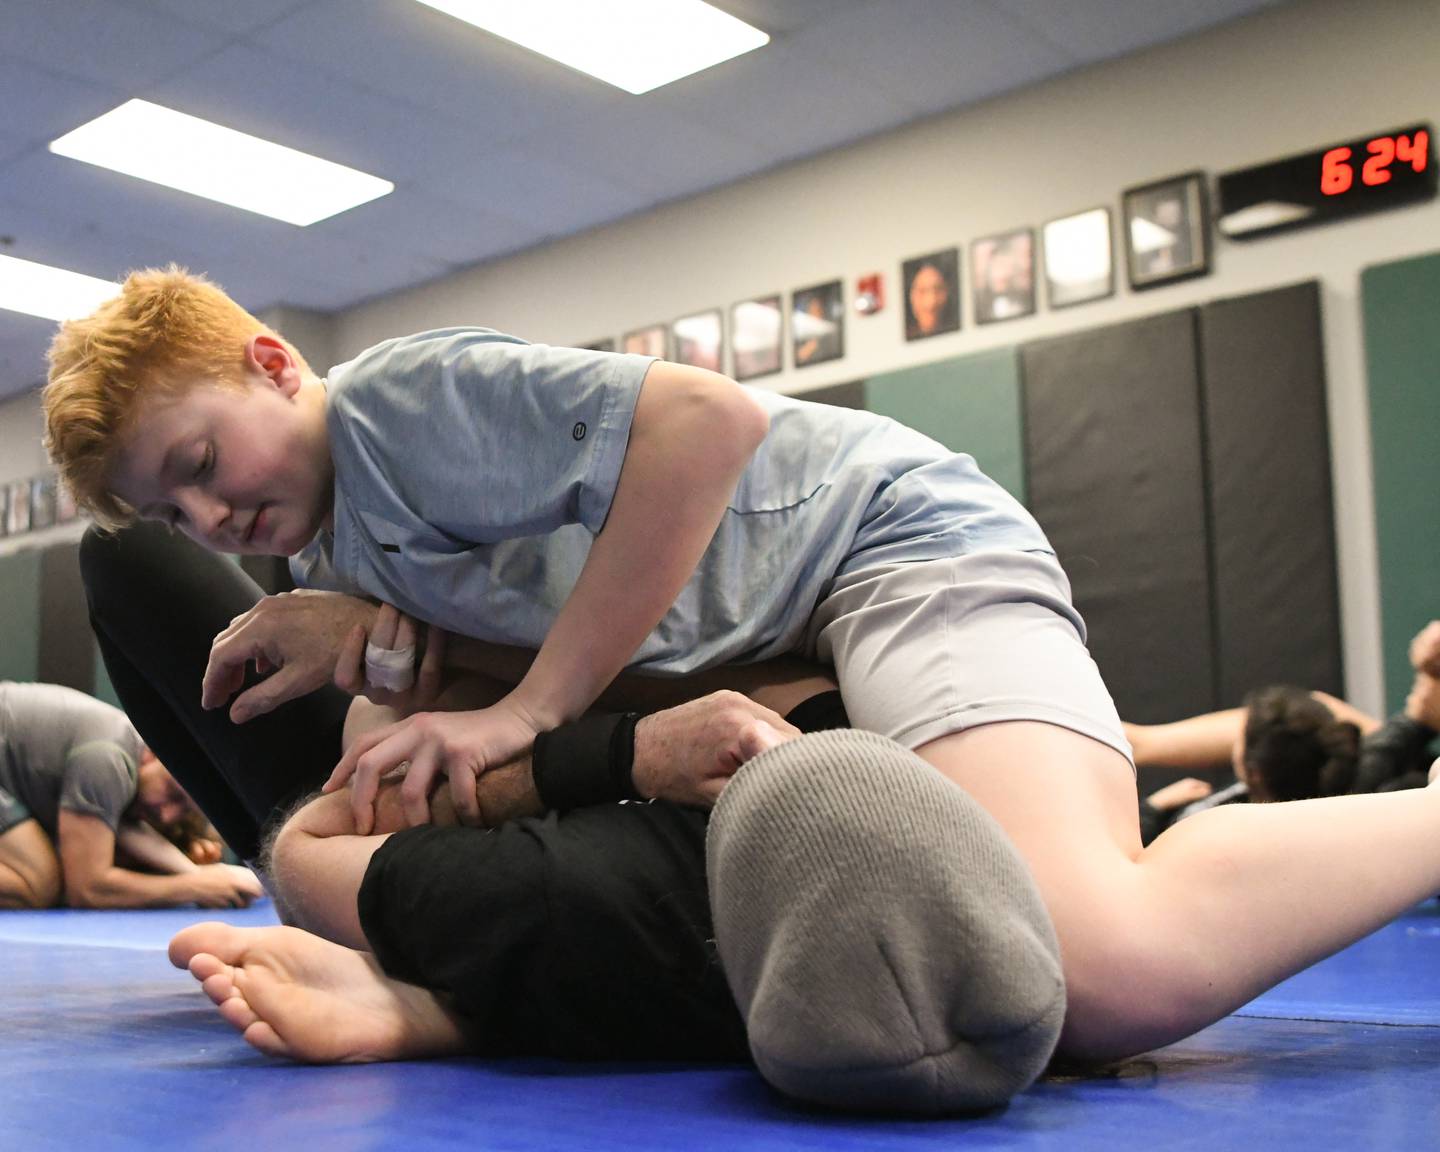 Mason Siemens, 13, of St. Charles tries out the moves he learned during Jiujitsu class at the Misfits on Wednesday March 3, 2024, on Wayne Carlson of Sycamore.